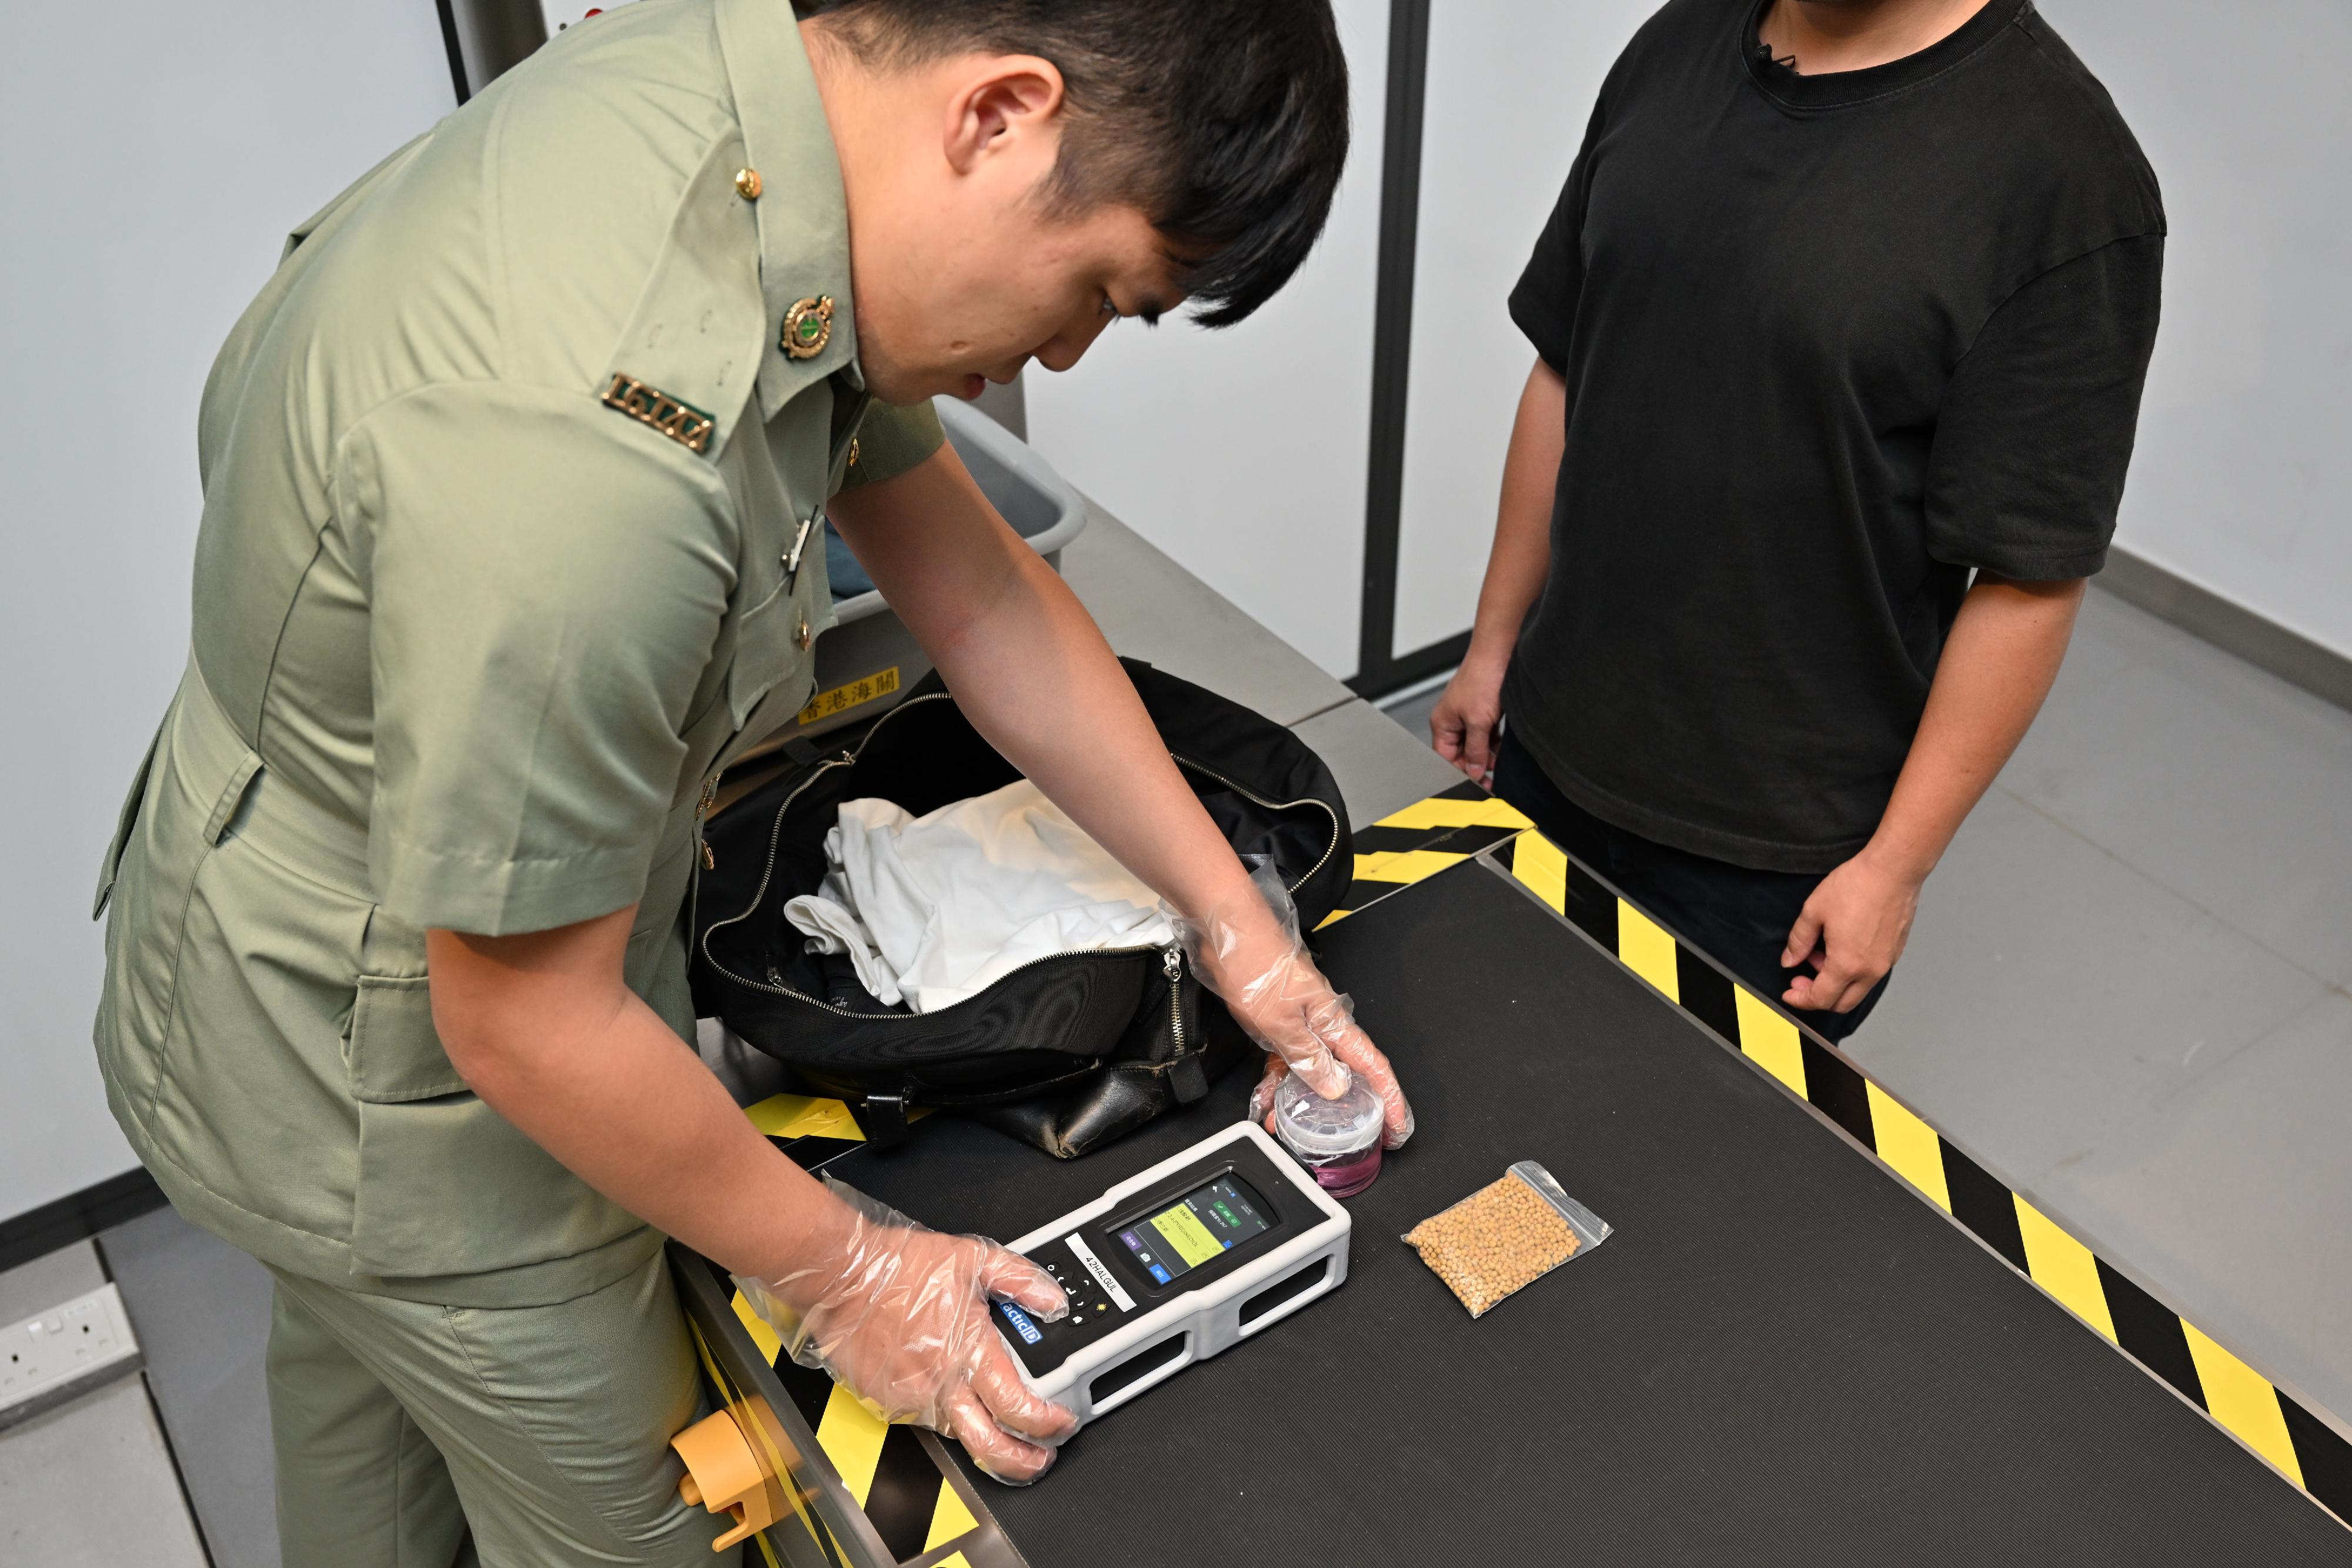 Hong Kong Customs and the Fire Services Department co-organised a counter-terrorism exercise codenamed "GATEKEEPER II" this afternoon (May 30) at the Ocean Terminal. Photo shows a Customs officer conducting Customs clearance with advanced equipment.